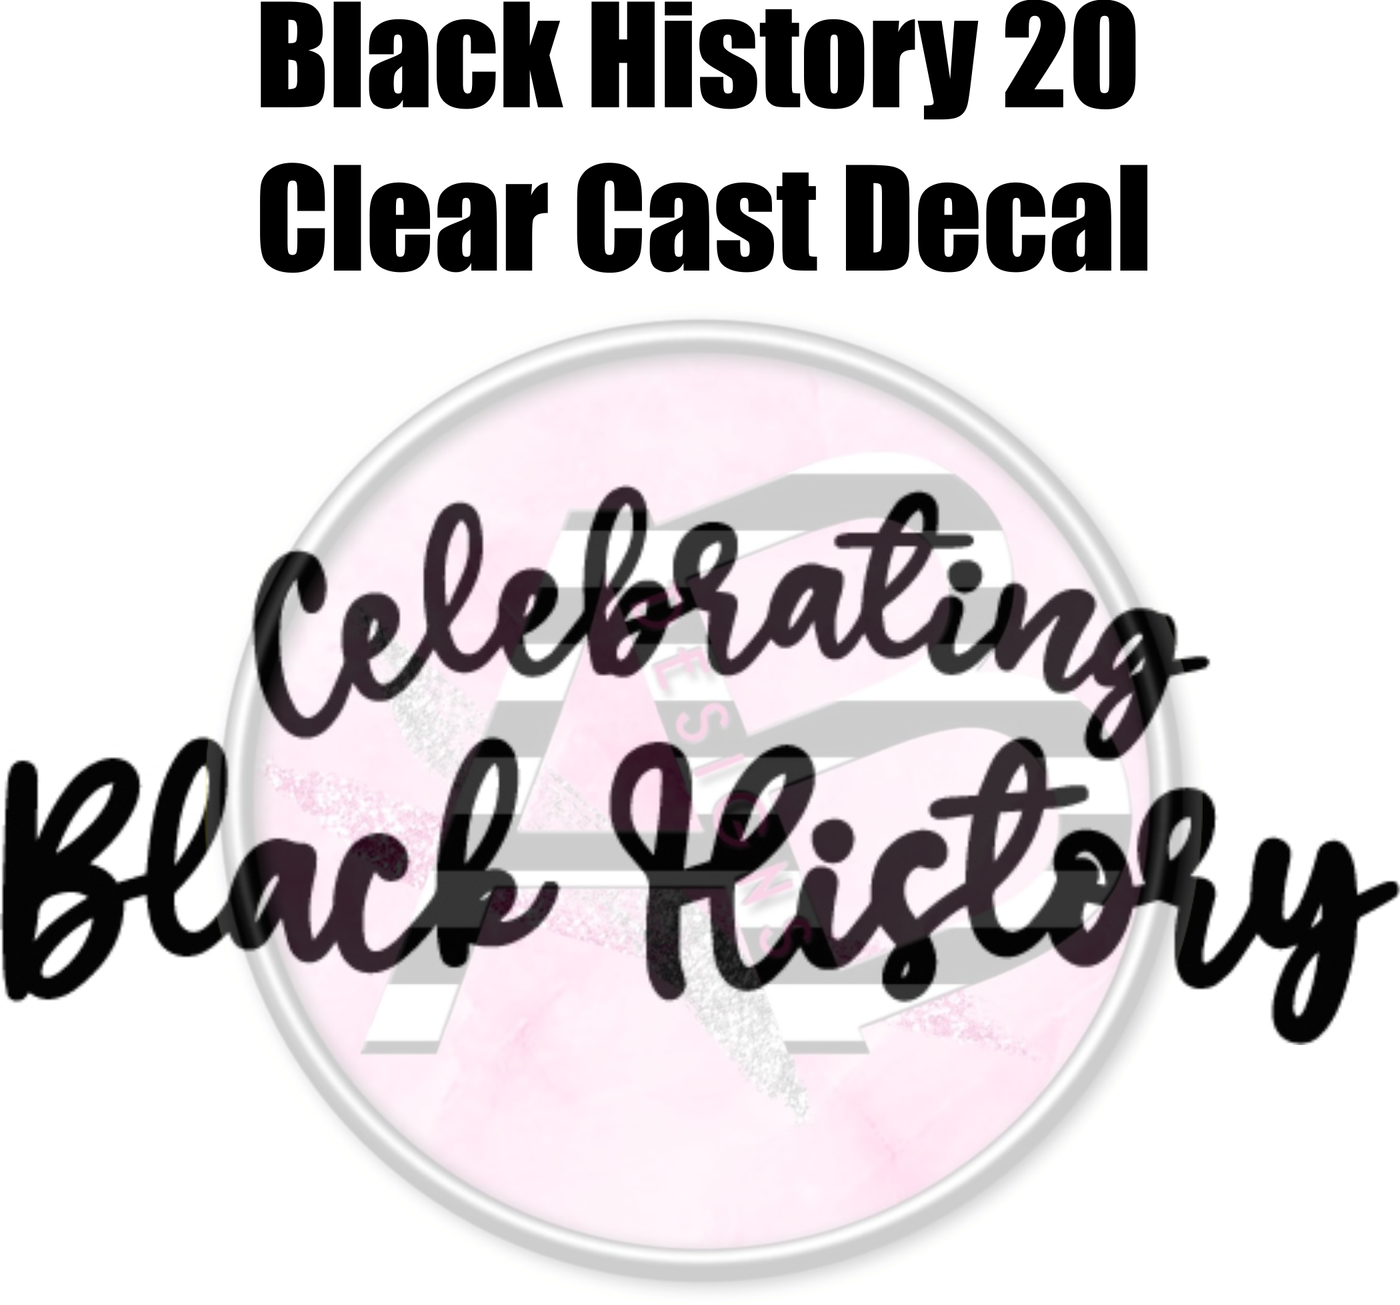 Black History 20 - Clear Cast Decal